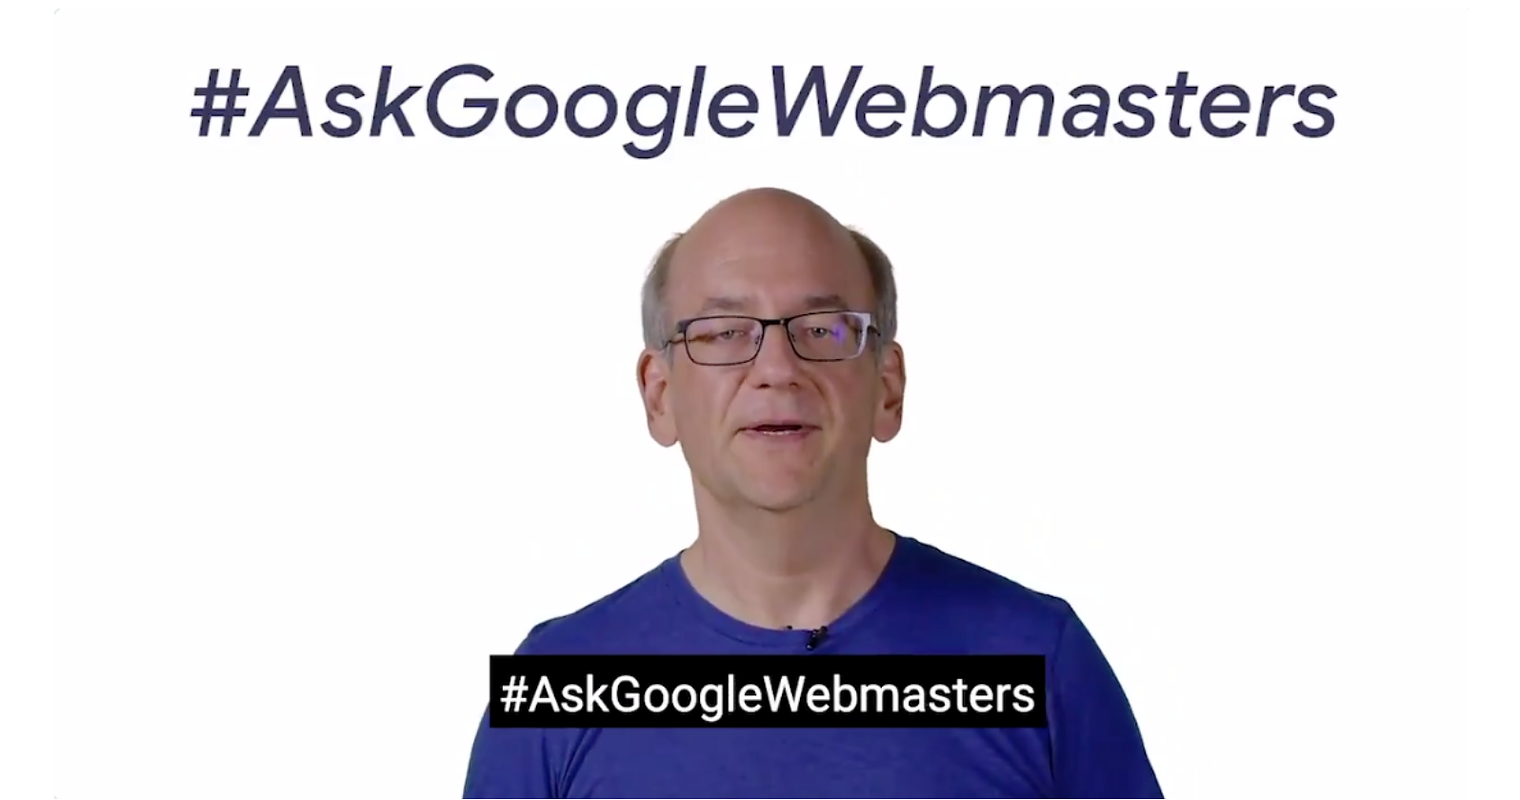 Google is Launching a New Q&A Video Series With John Mueller